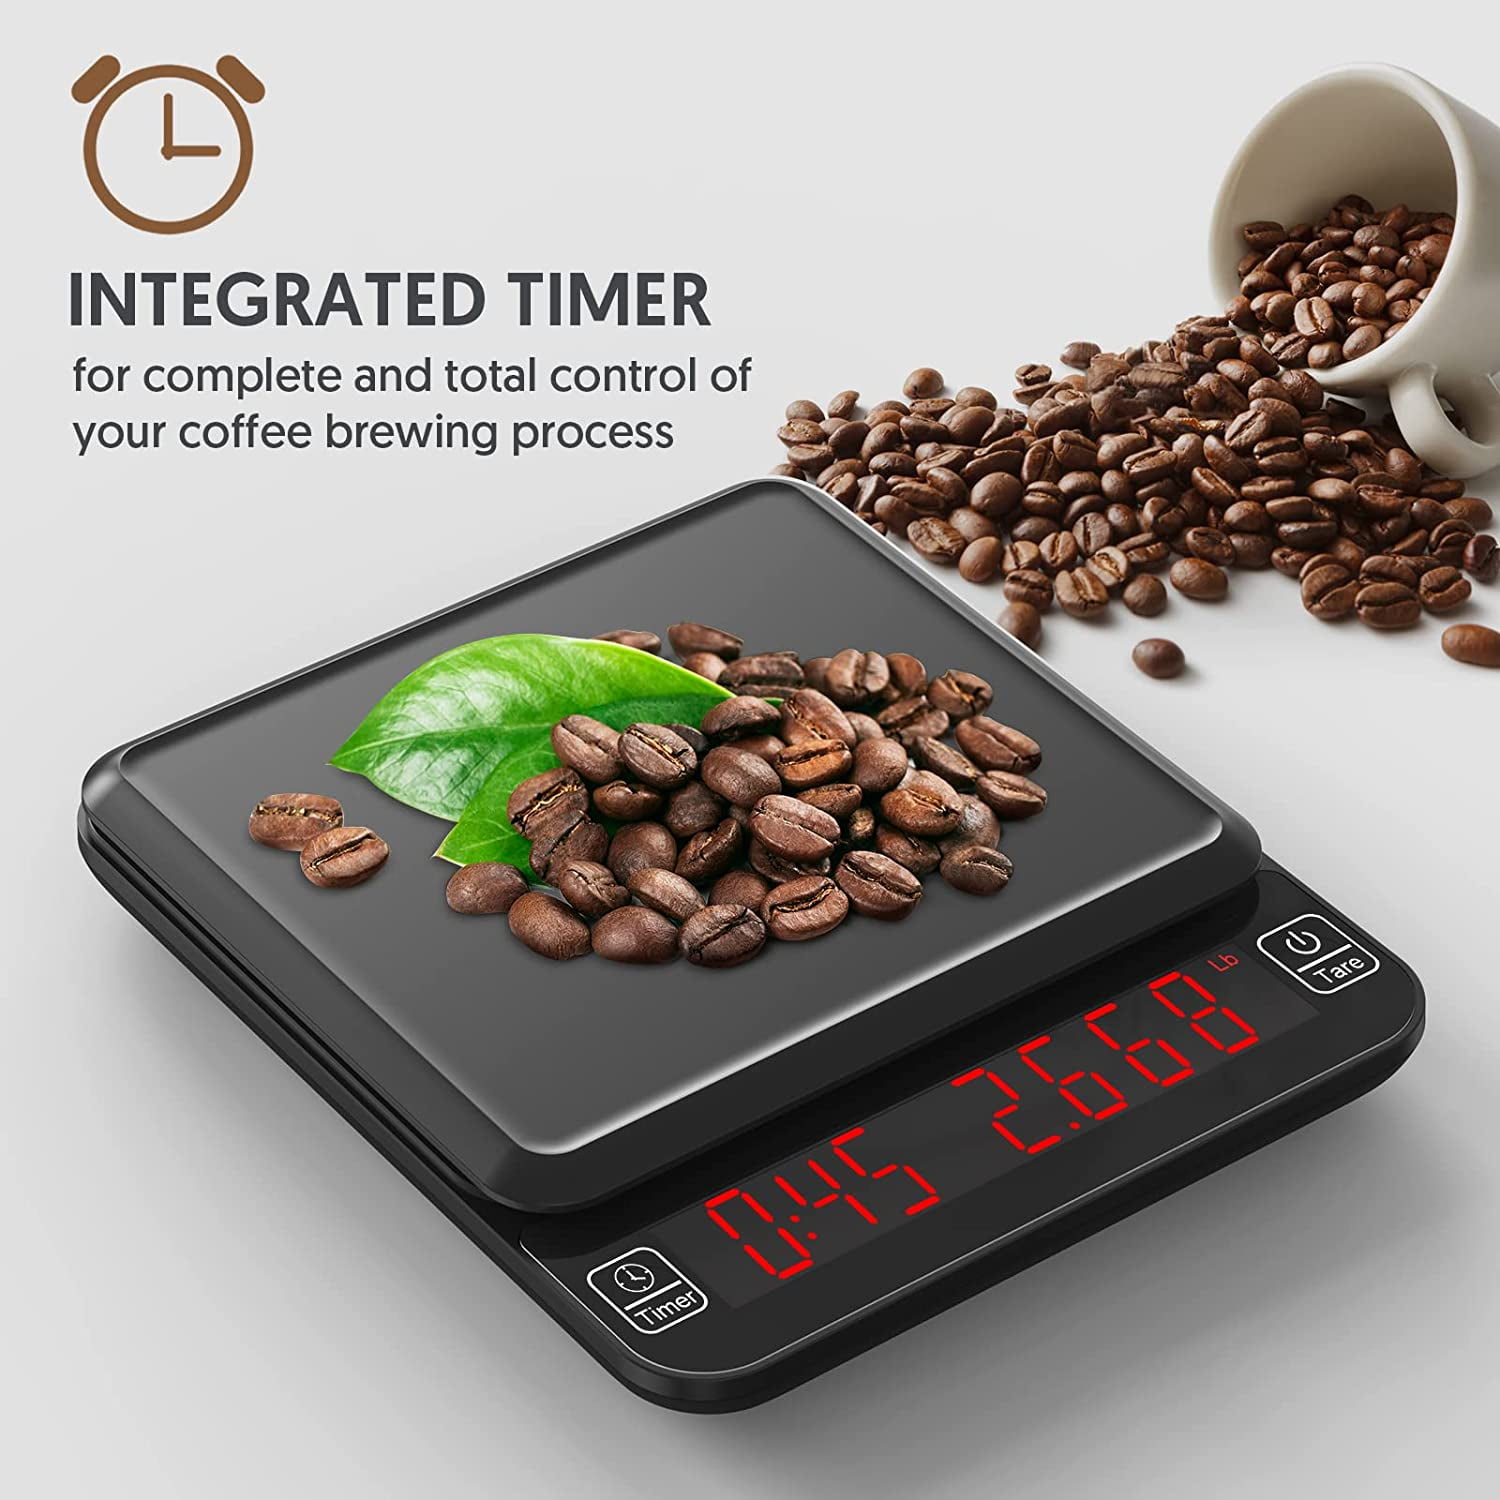 Tree MRB-S 5000 Stainless Steel Precision Coffee Scale, 5000 g x 1 g -  Scales Plus